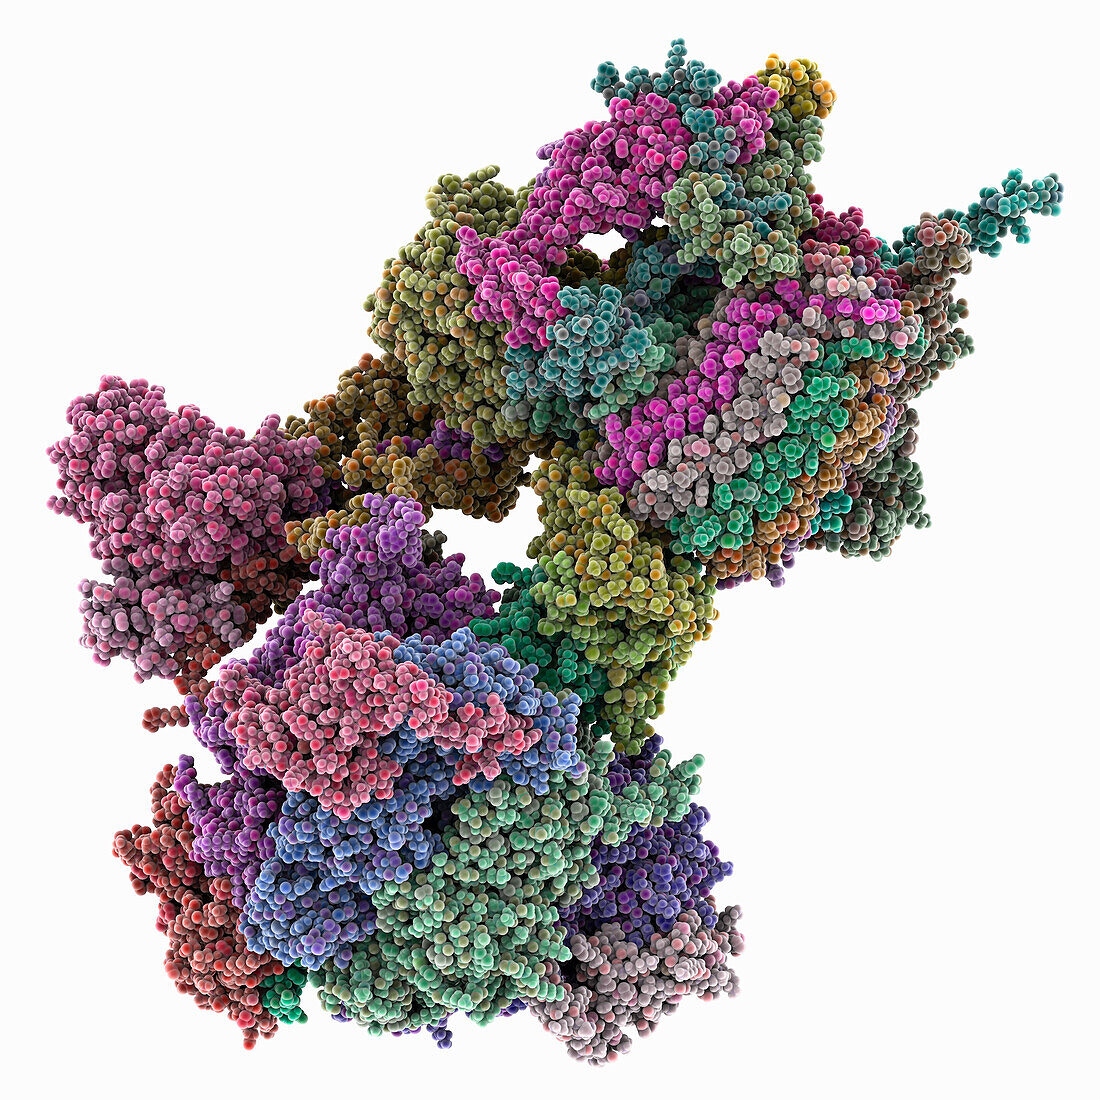 ATP synthase from Trypanosoma brucei, molecular model